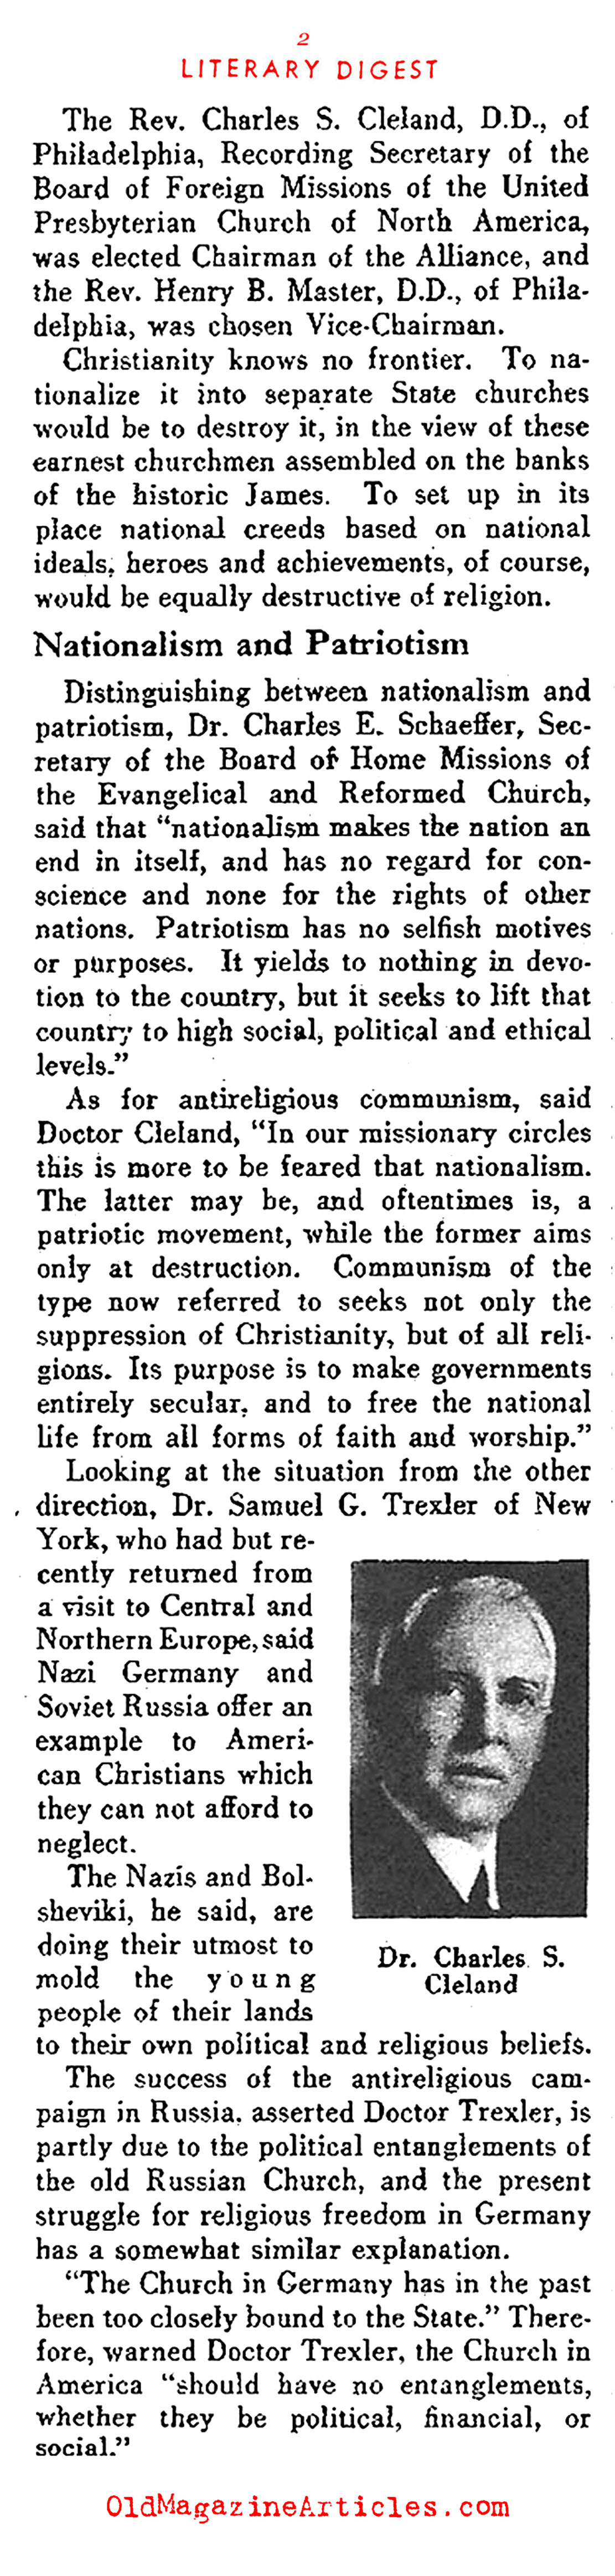 The Era of Nationalized Religions (The Literary Digest, 1935)